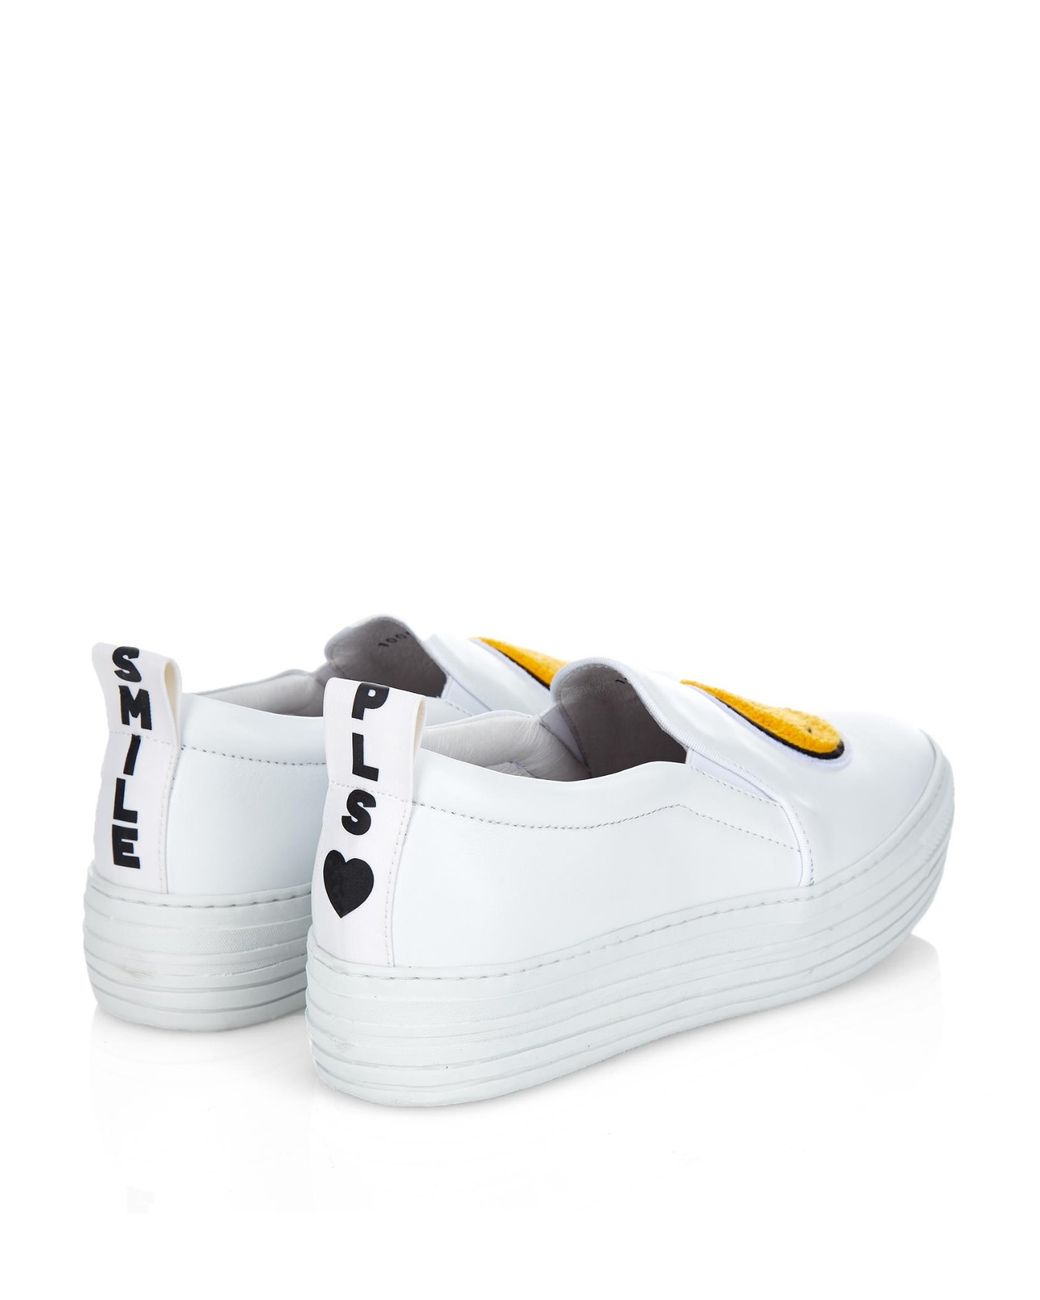 Joshua Sanders Smiley-Face Leather Platform Trainers in White | Lyst